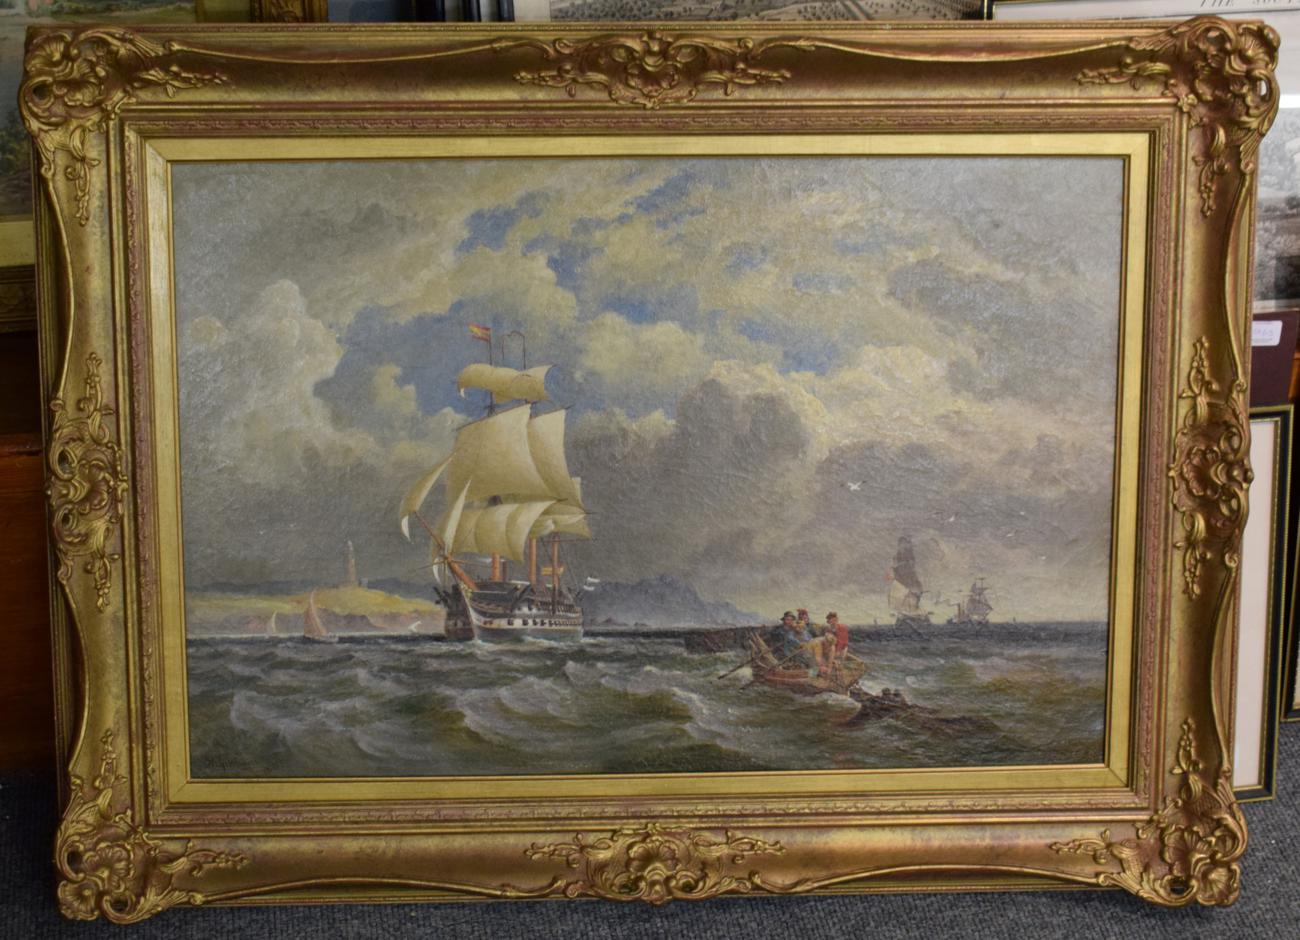 Lot 1082 - William Gibbons (fl.1858-1892), Naval frigates off coastline, signed and dated 1883, oil on canvas